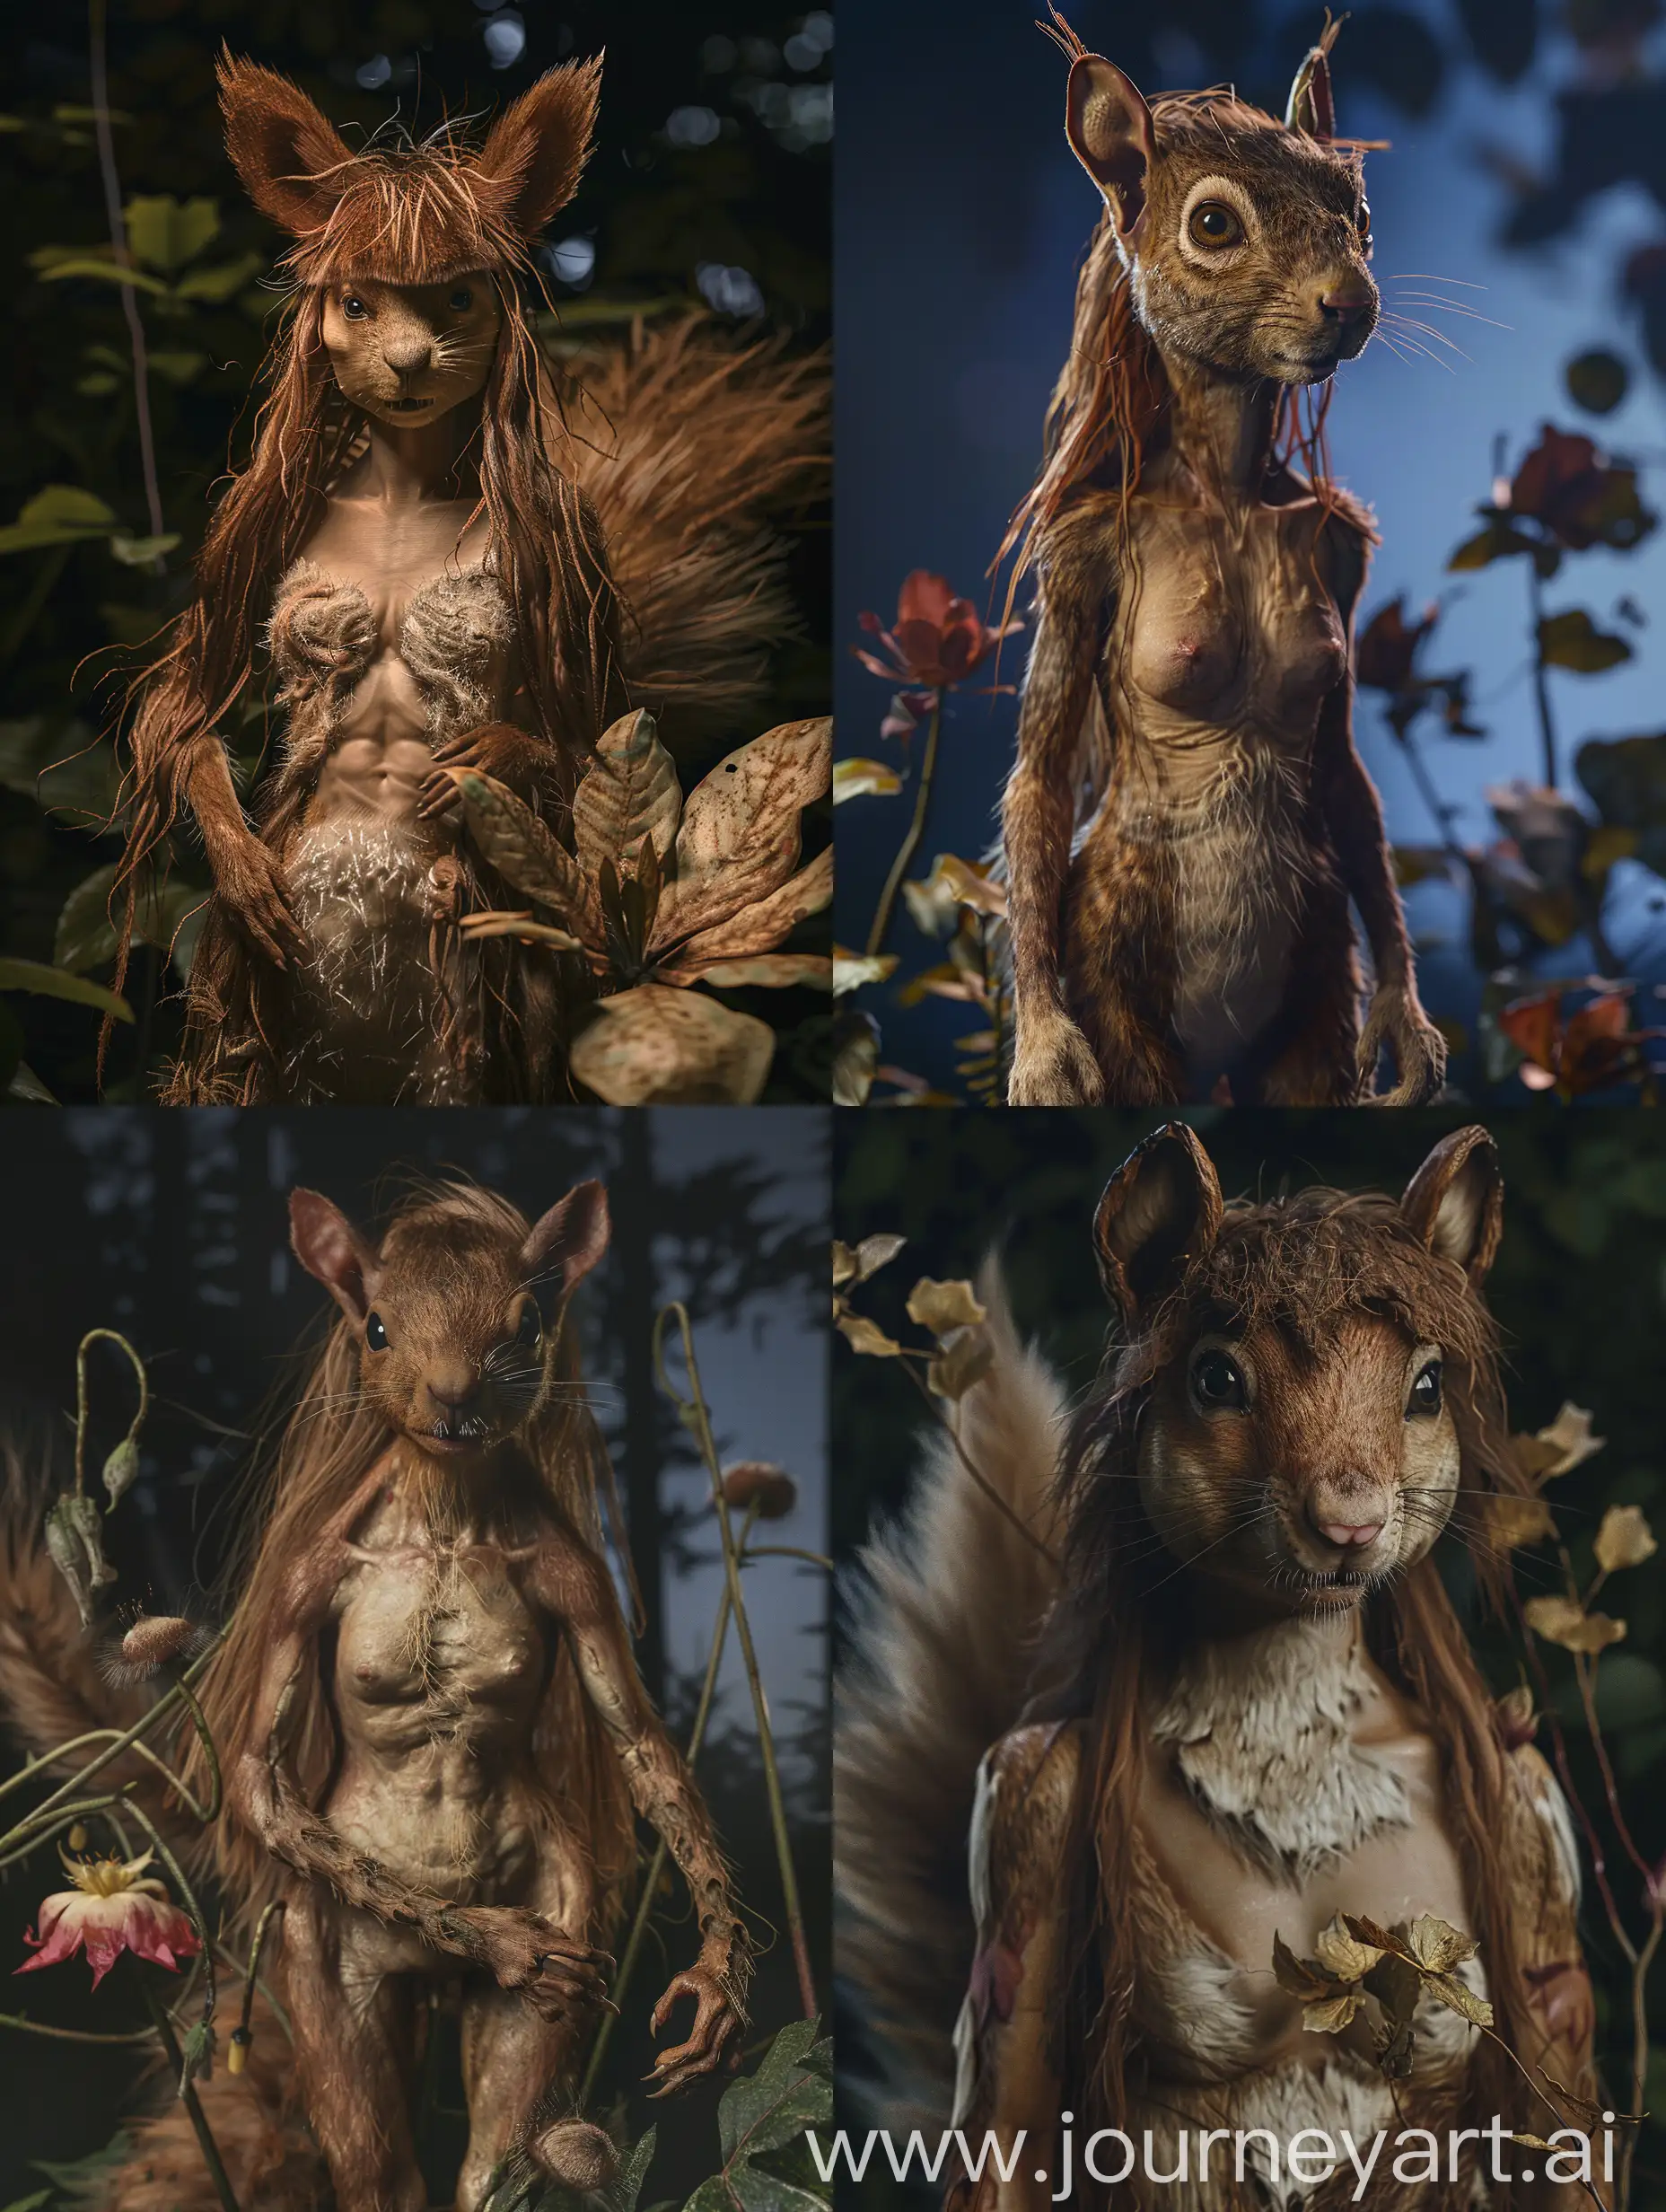 A squirrle. She has loose brown hair, a human face and a chest. She has ears, fur and a tail. She is standing in a forest at night. She has paws for feet. Realistic photograph, full body picture. She is as tall as a flower.